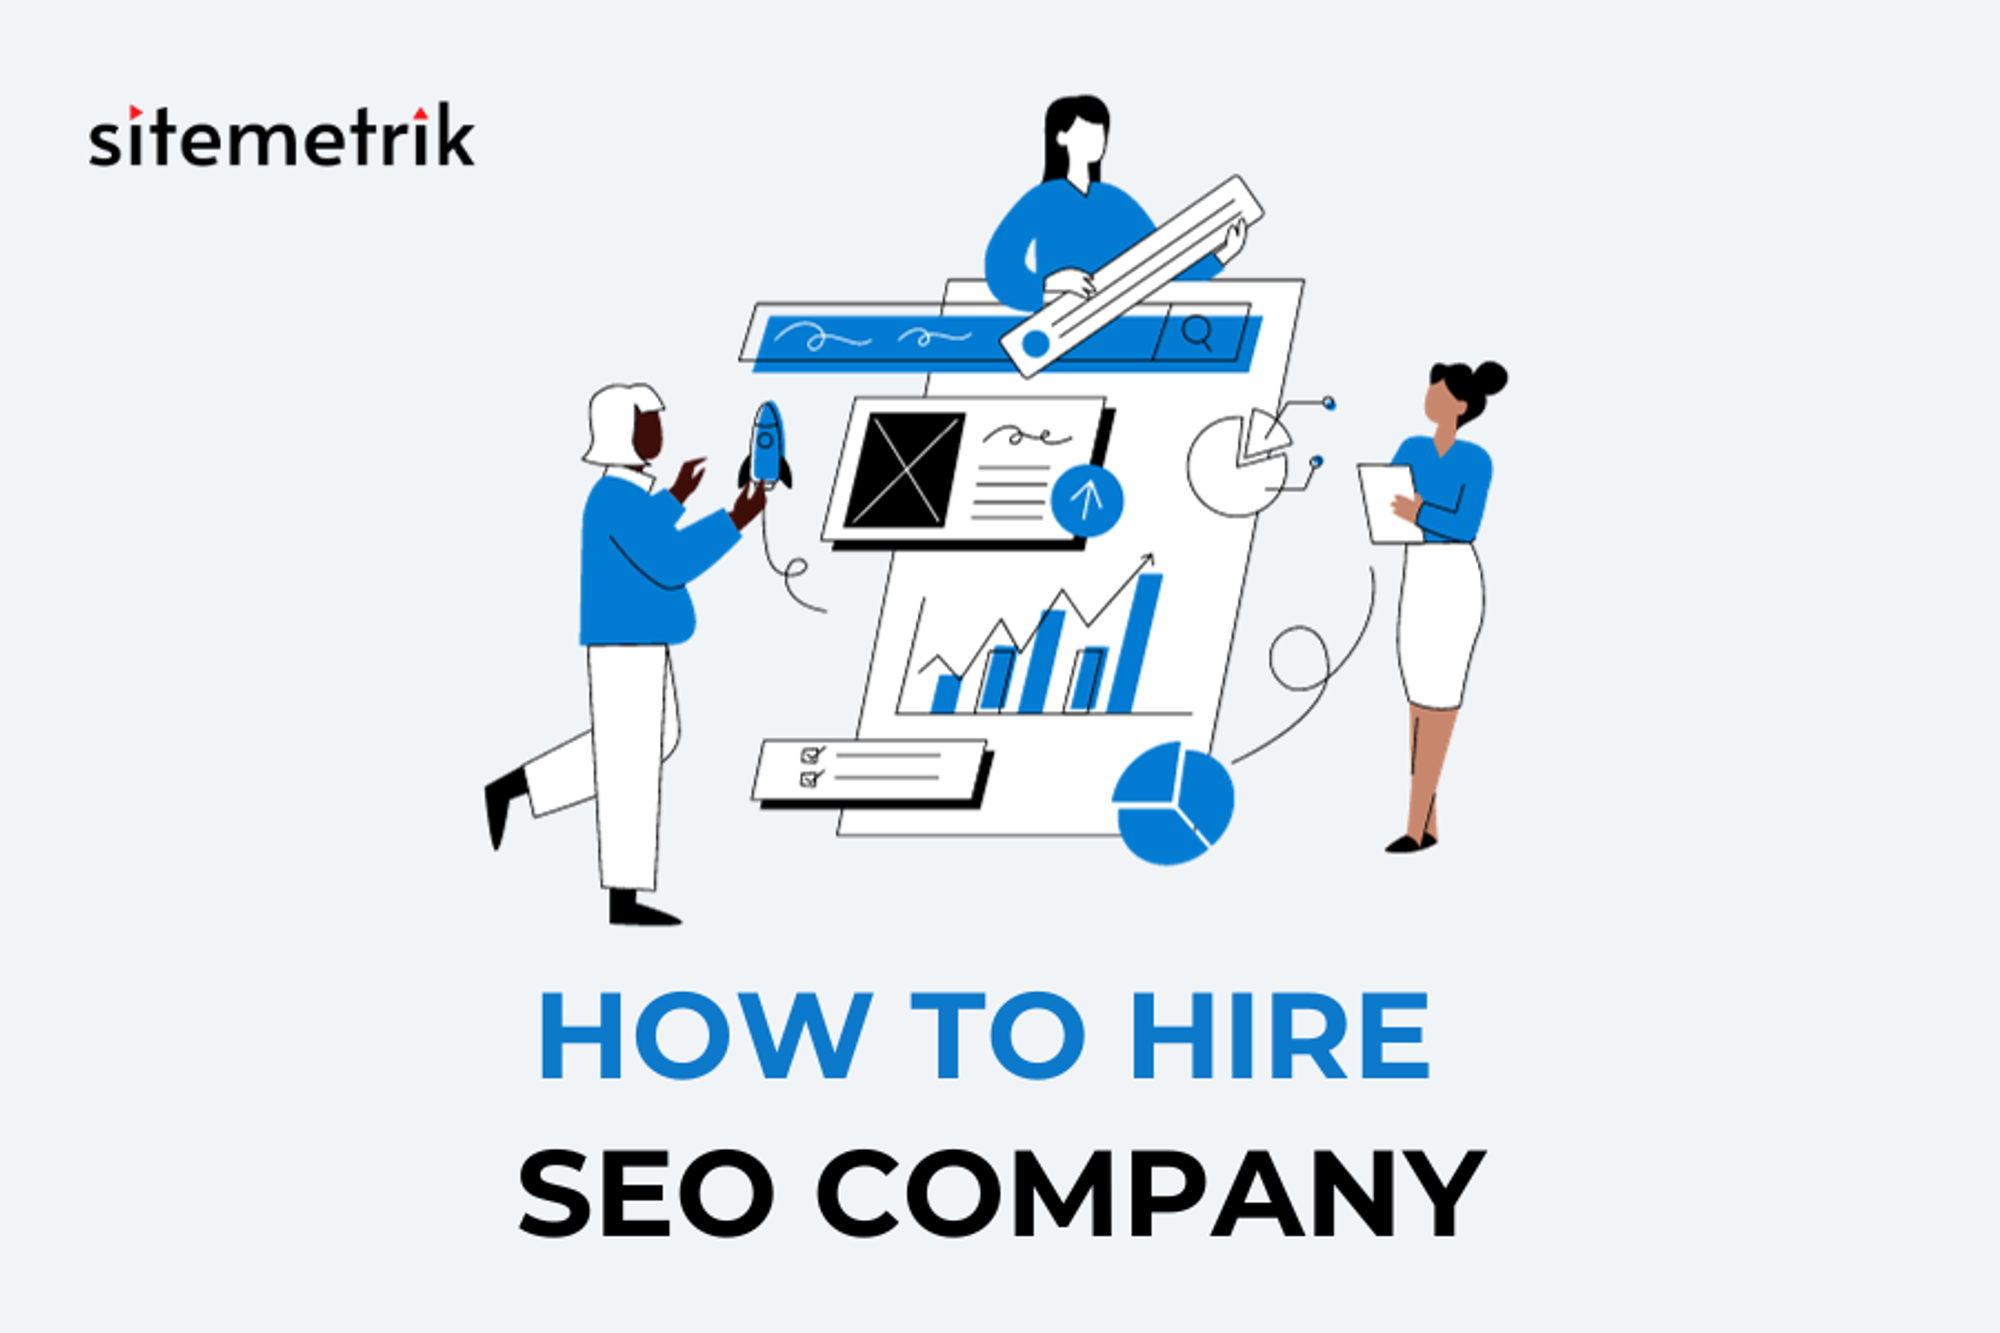 How to Hire SEO Company? What to Look for When Hiring? | Sitemetrik